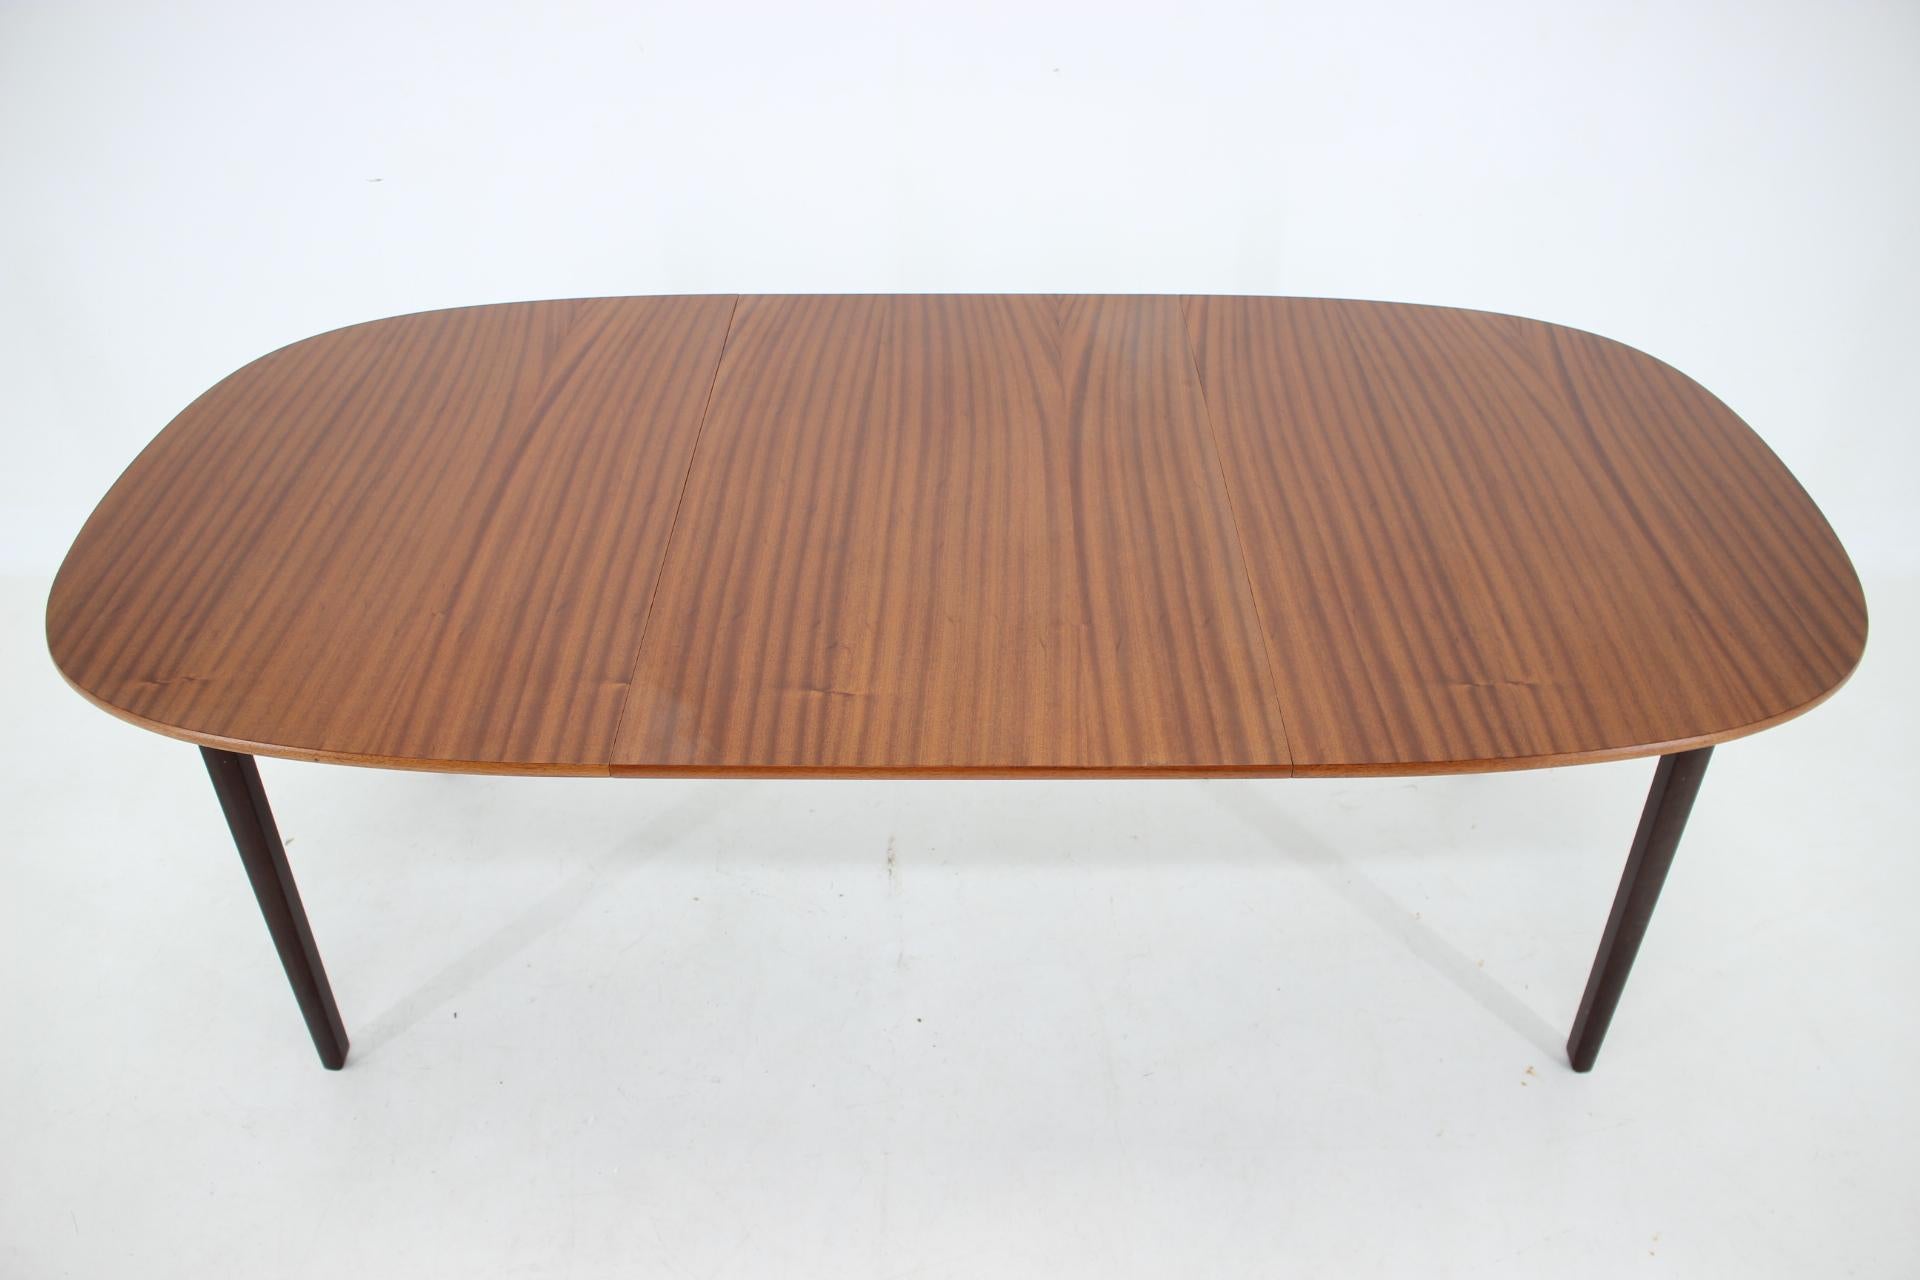 1960s Ole Wanscher Extendable Mahogany Dining Table by P. Jeppesen For Sale 3